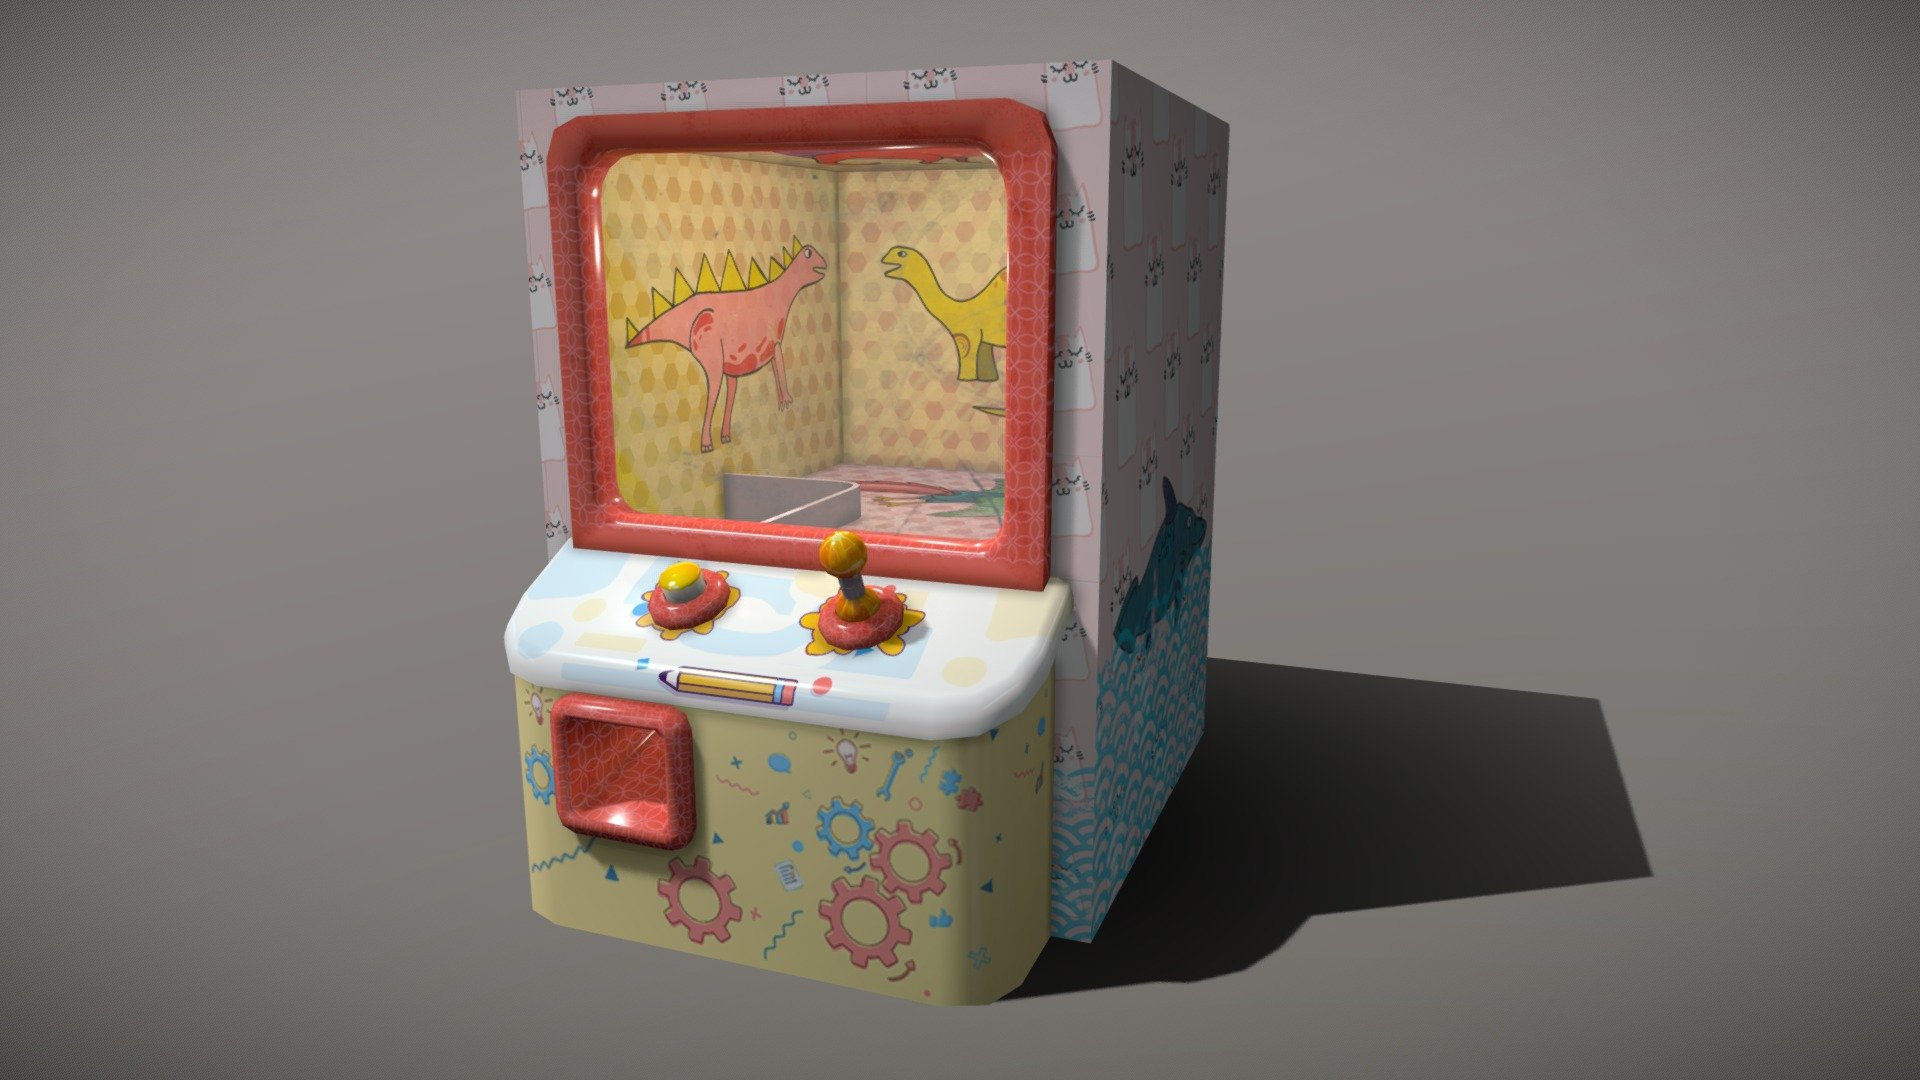 Low poly claw machine created for mobile game Claw Machine 3D
Modelled in Blender and Textured in Paint - Claw Machine - 3D model by shtran 3d model